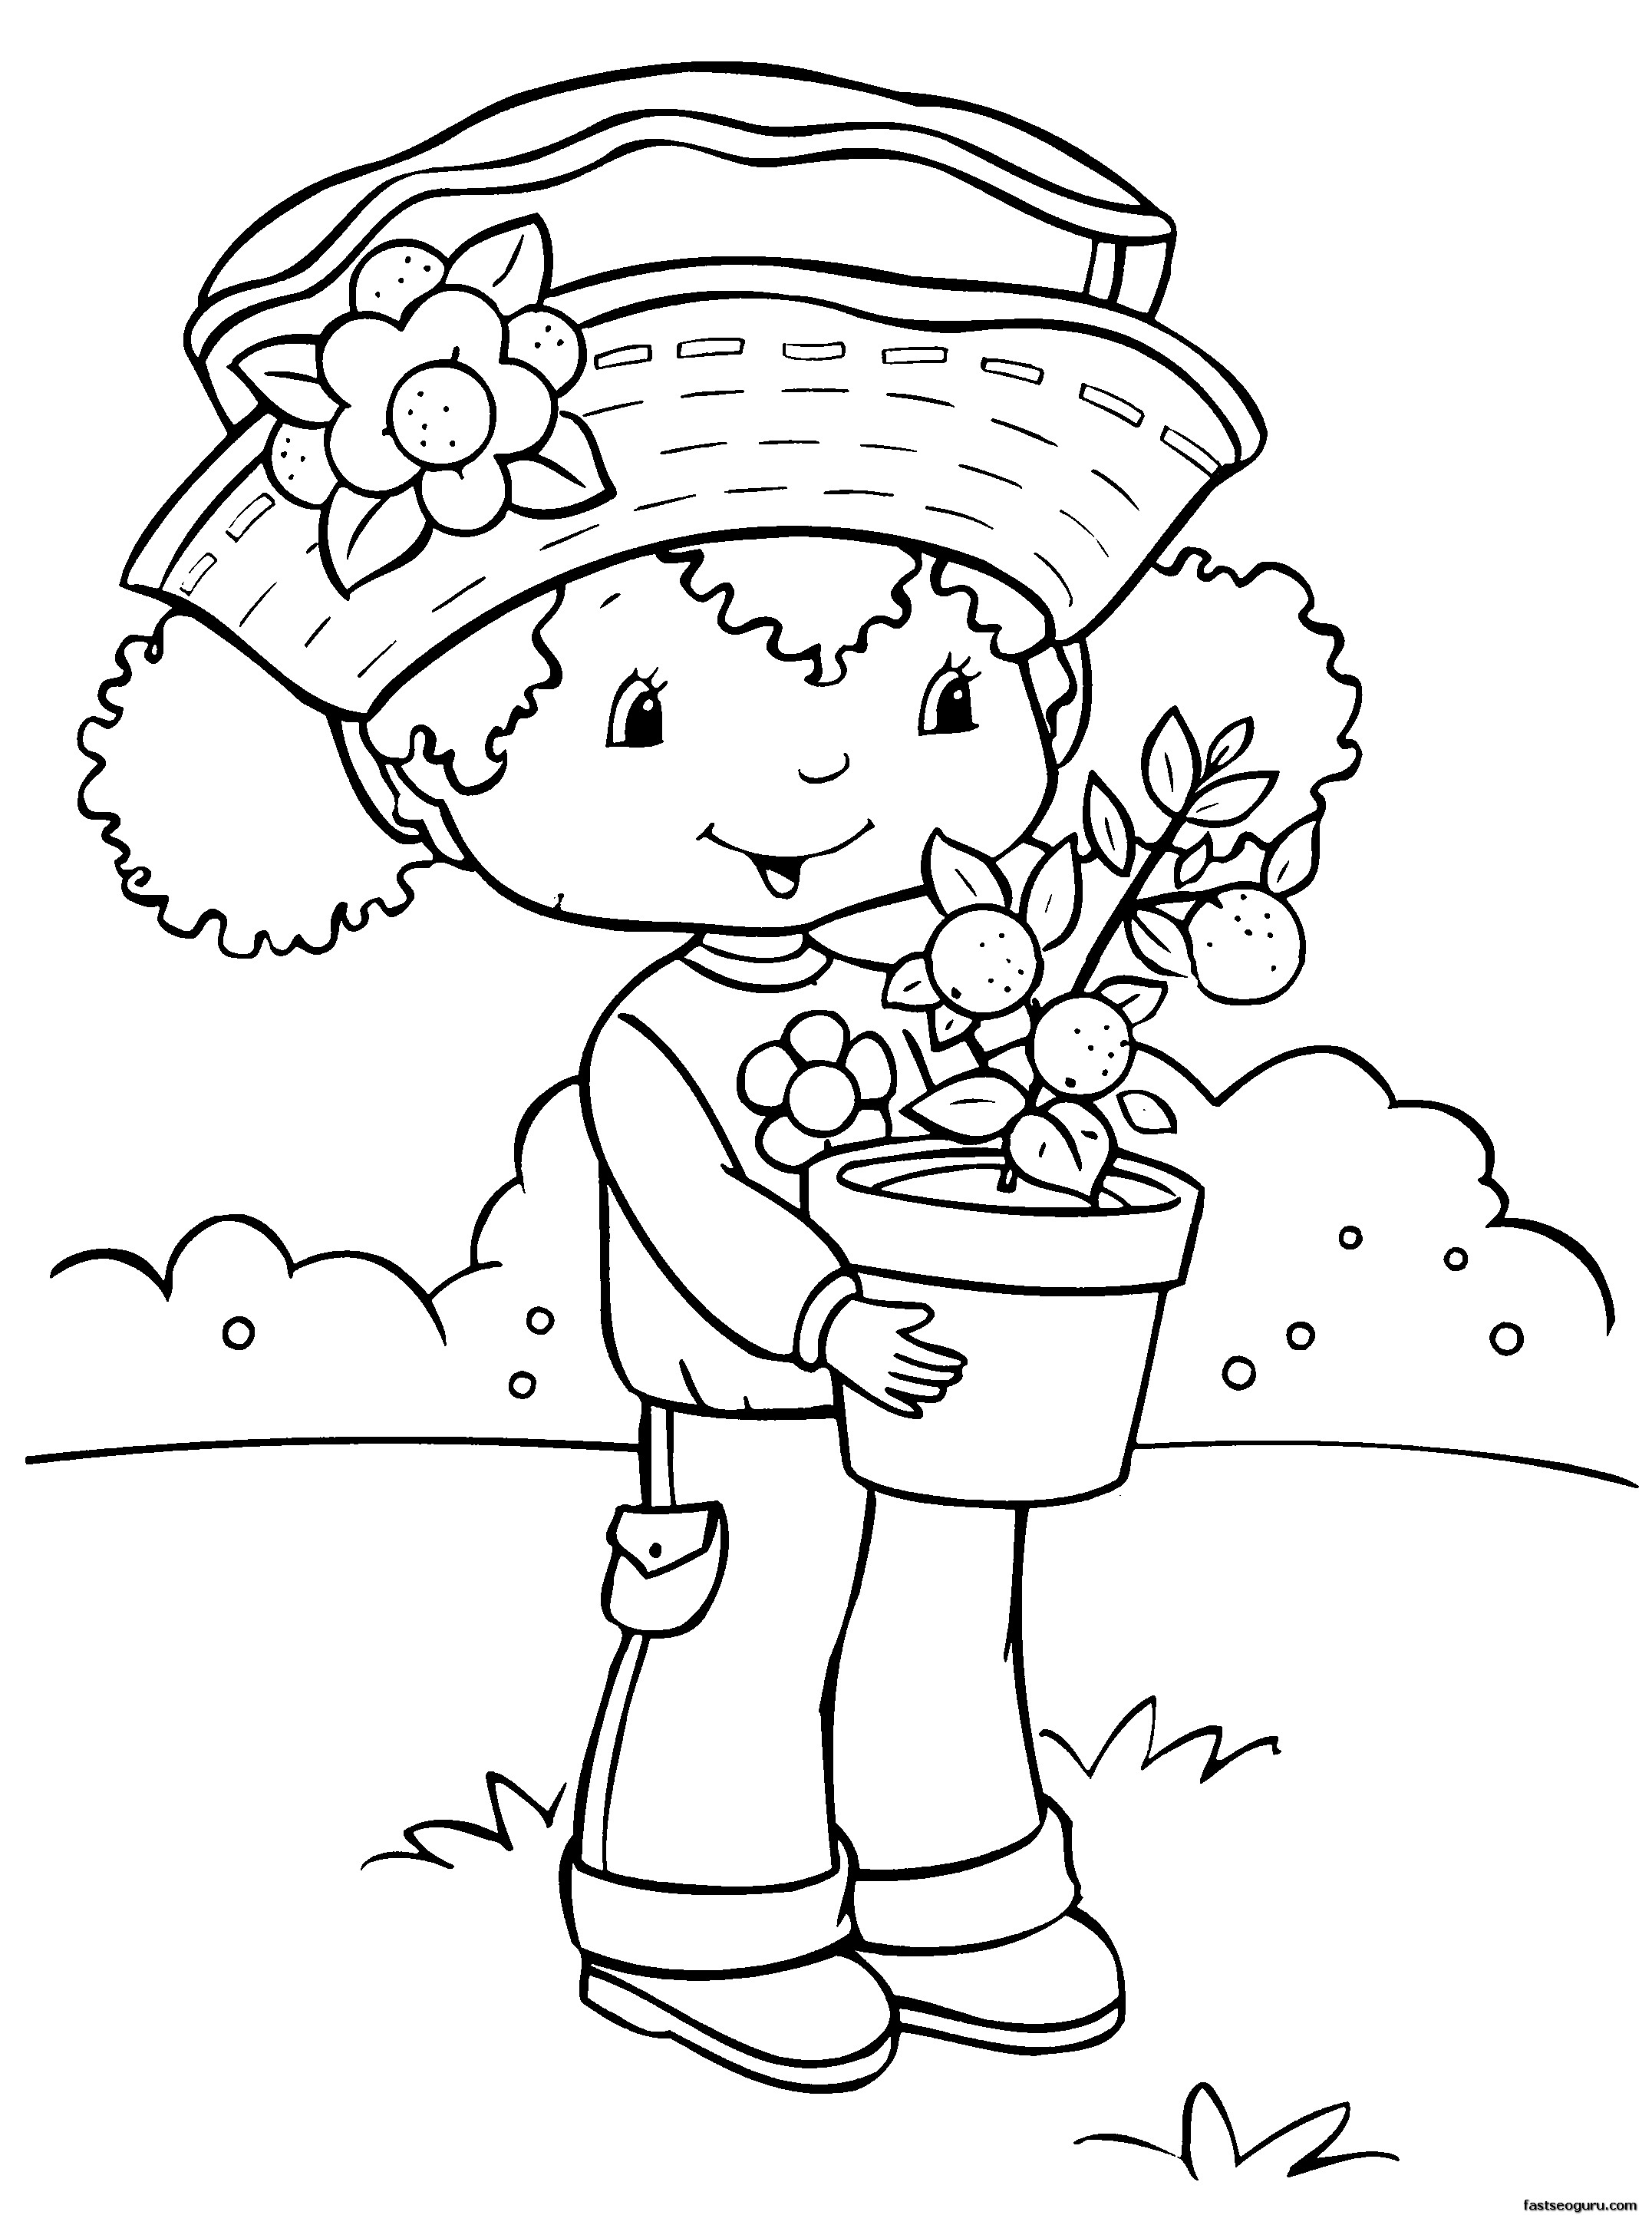 Printable cartoon Strawberry Shortcake coloring pages for